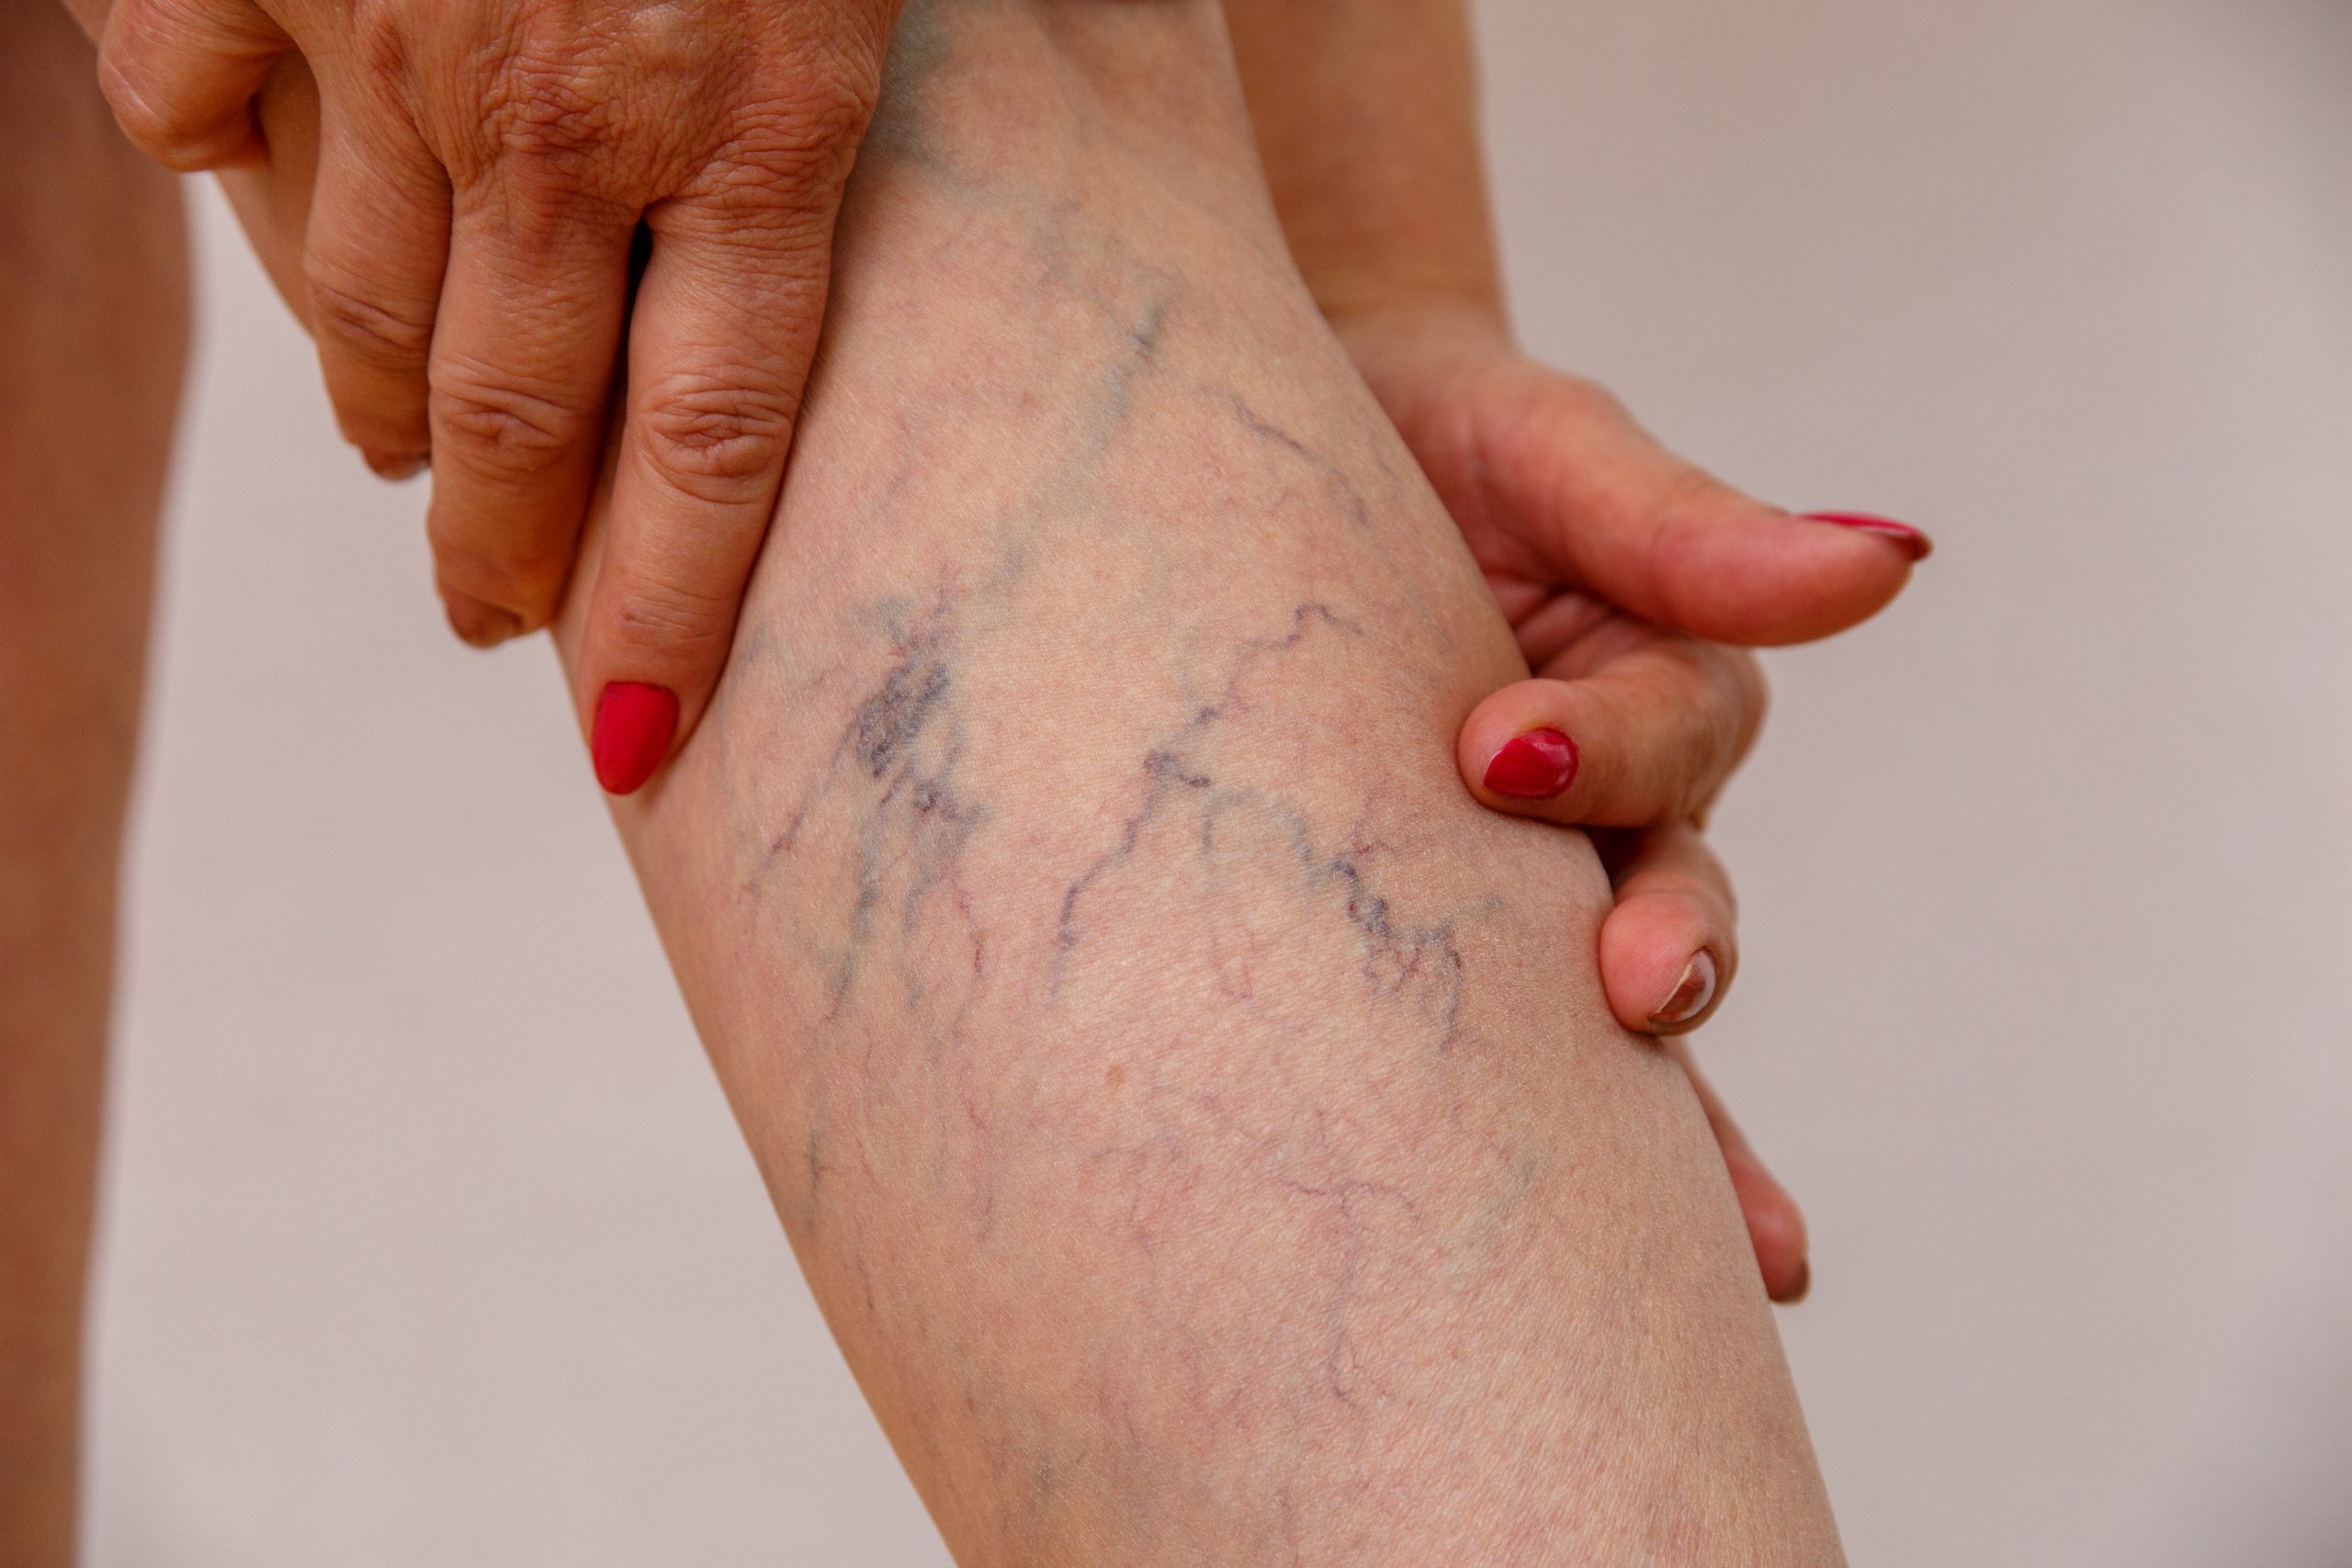 How can I get rid of varicose veins without surgery